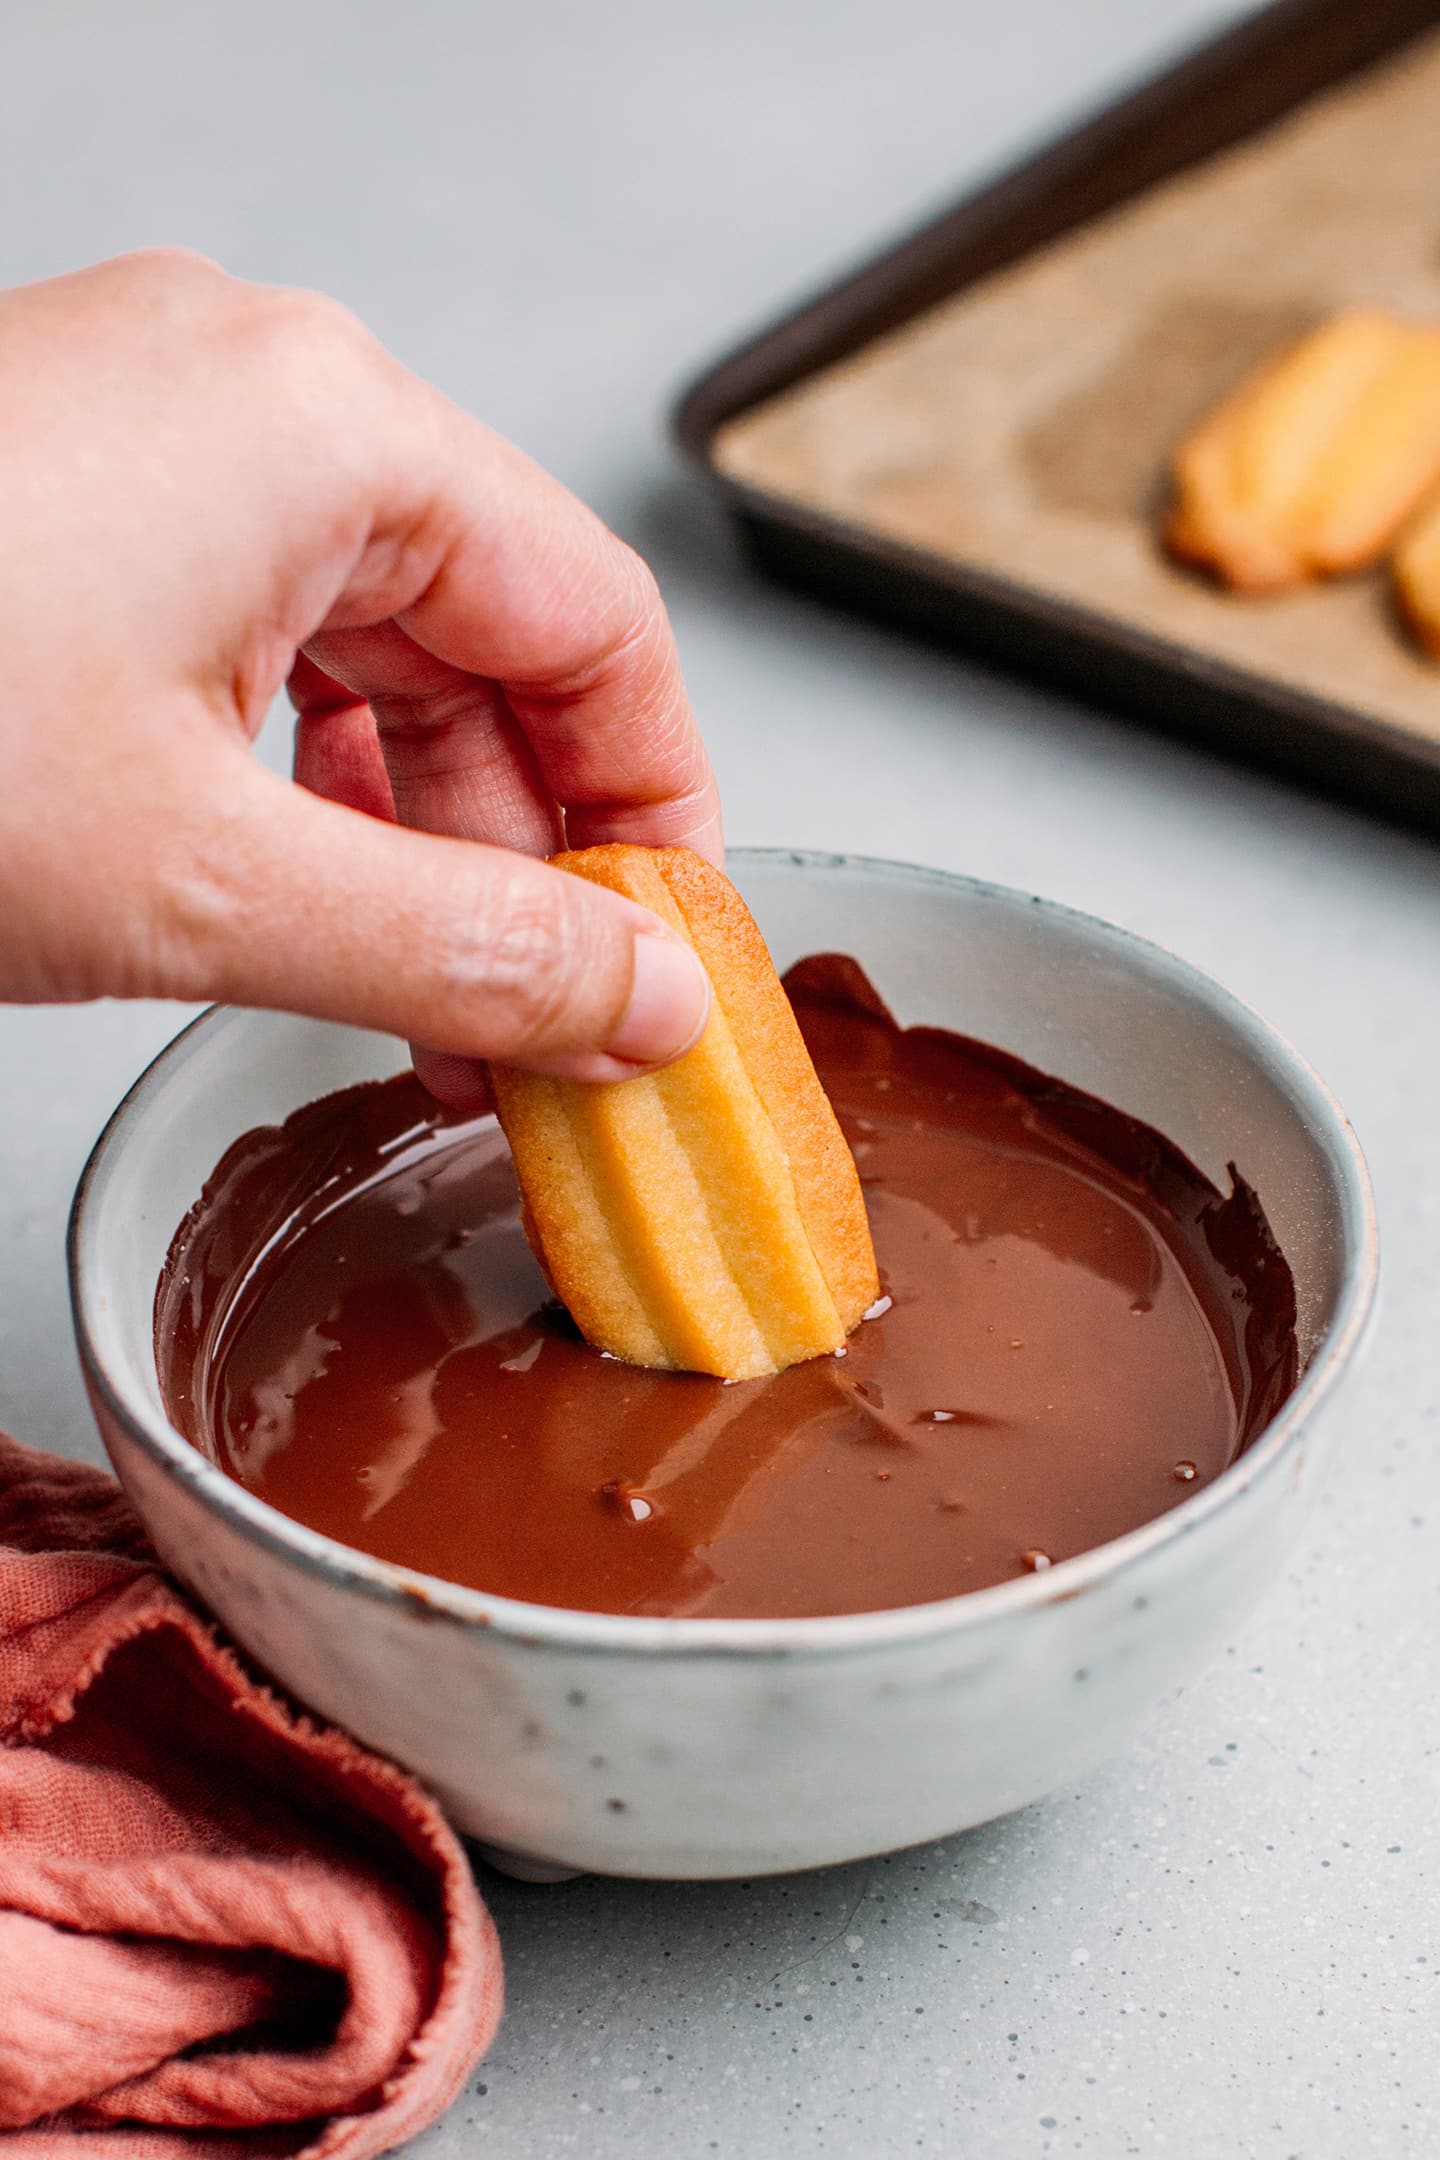 Dipping a spritz cookie in melted dark chocolate.